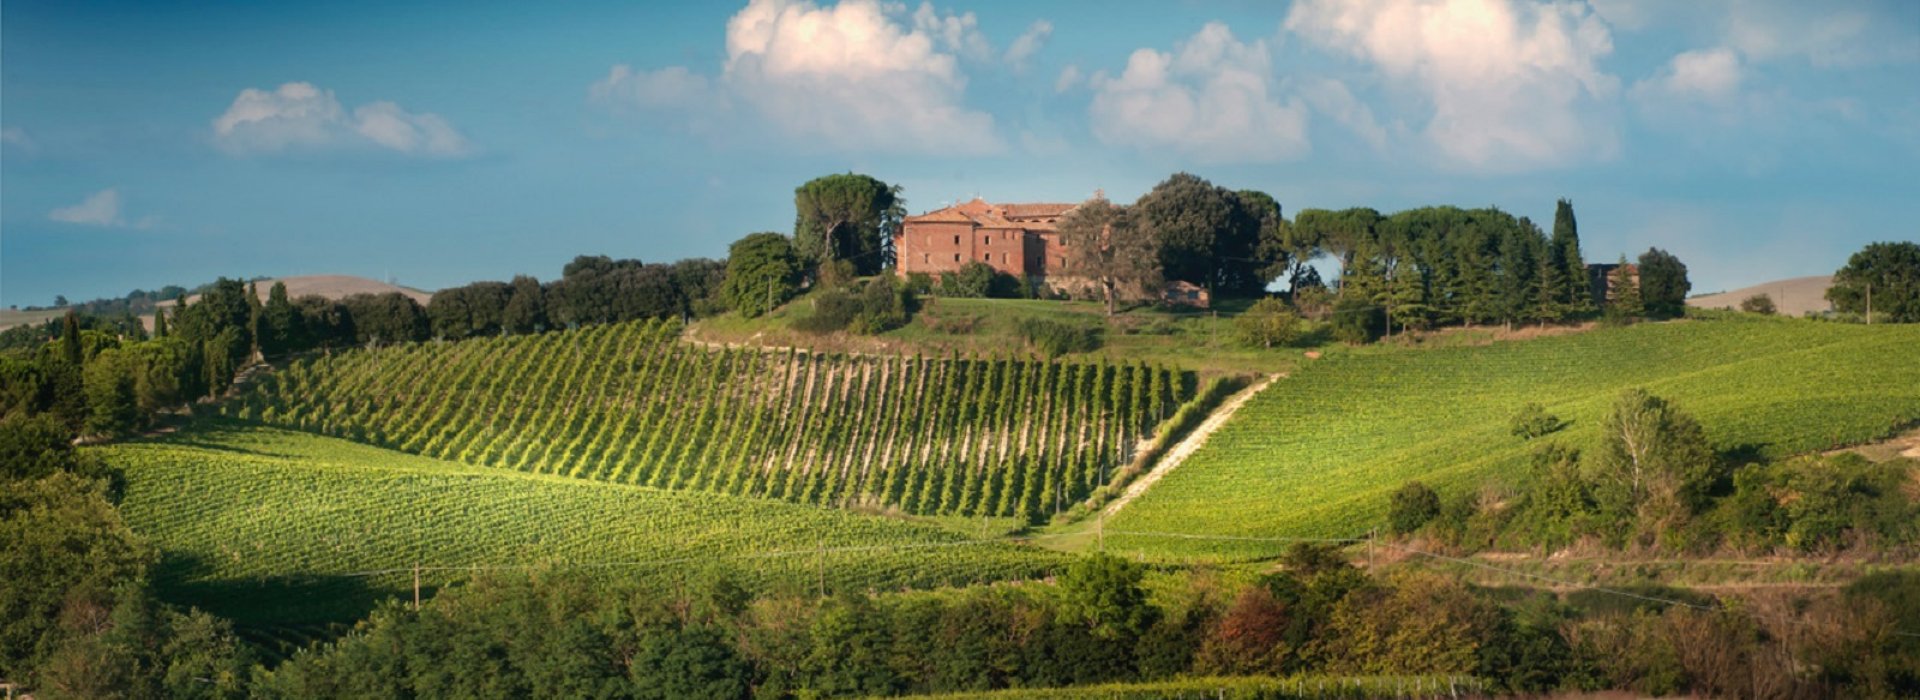 Guided tour of the winery with tasting of Brunello di Montalcino